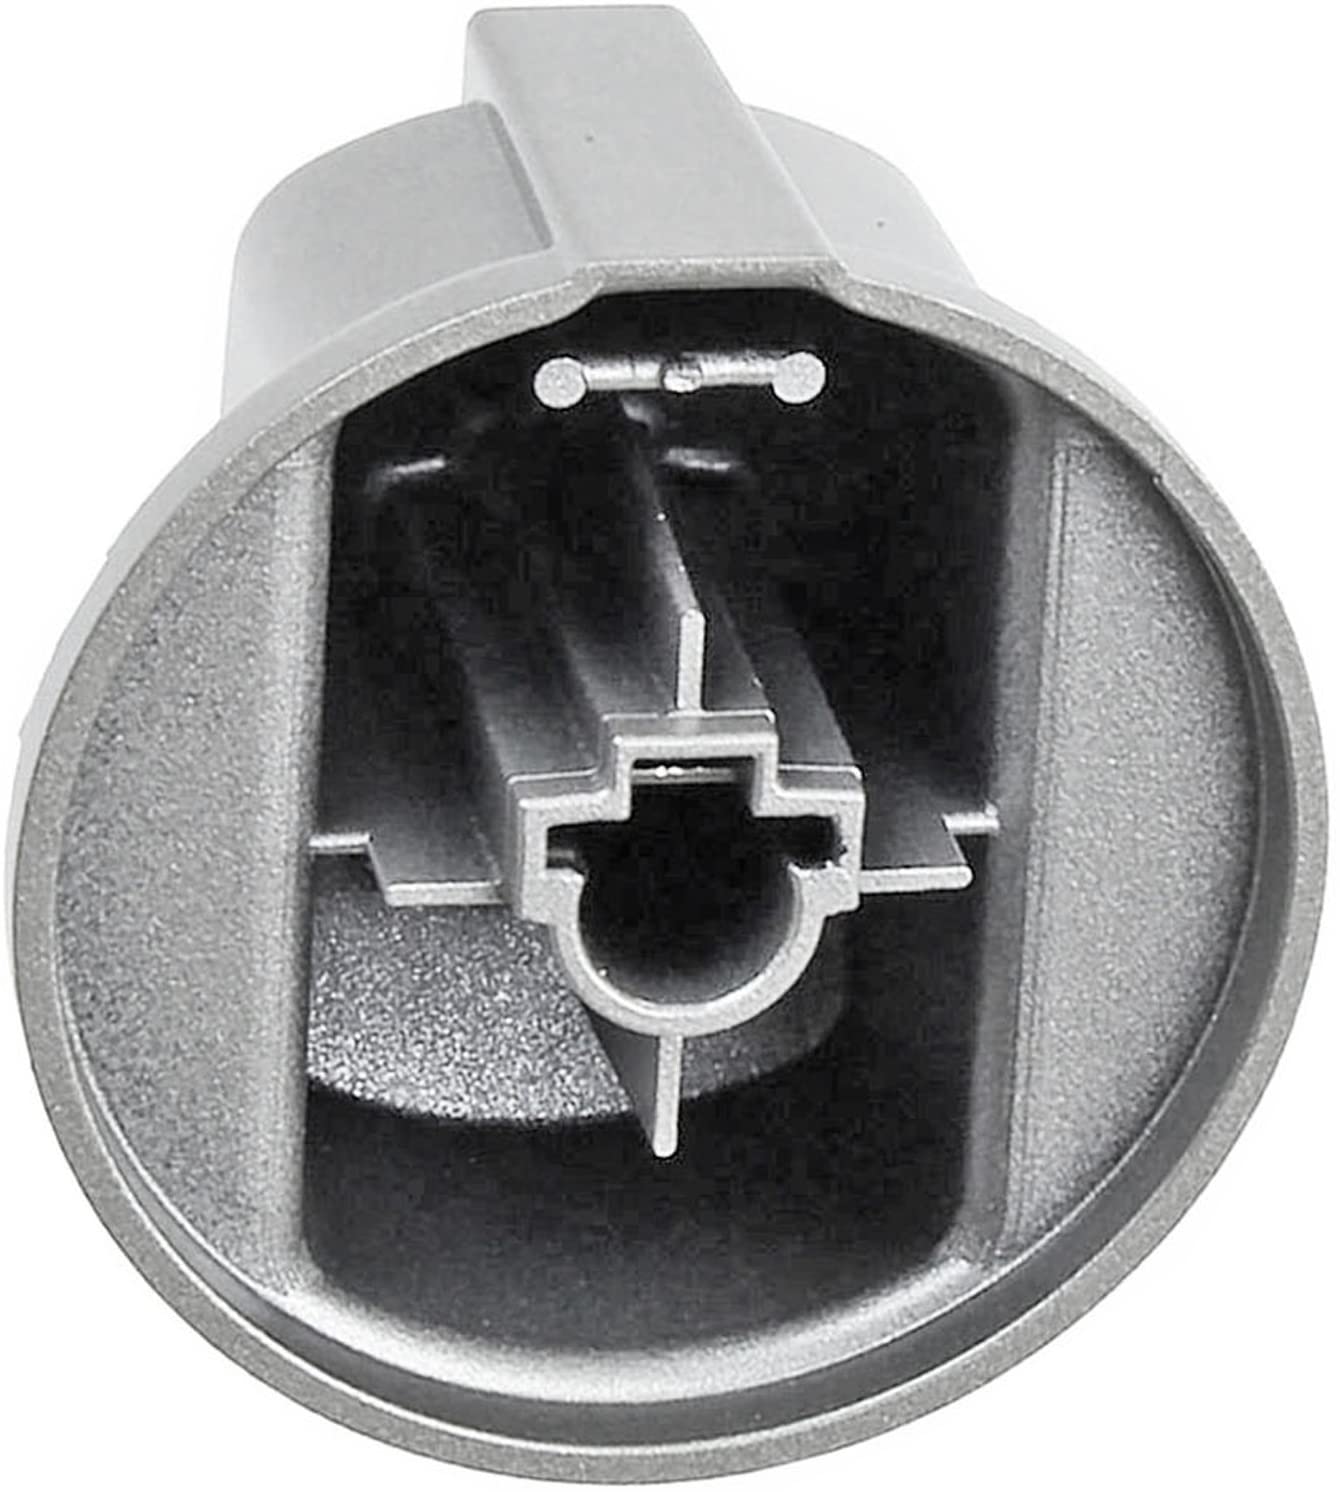 Control Knob Switch Button for INDESIT FIM Cooker Oven Pack of 5 (Silver/INOX)